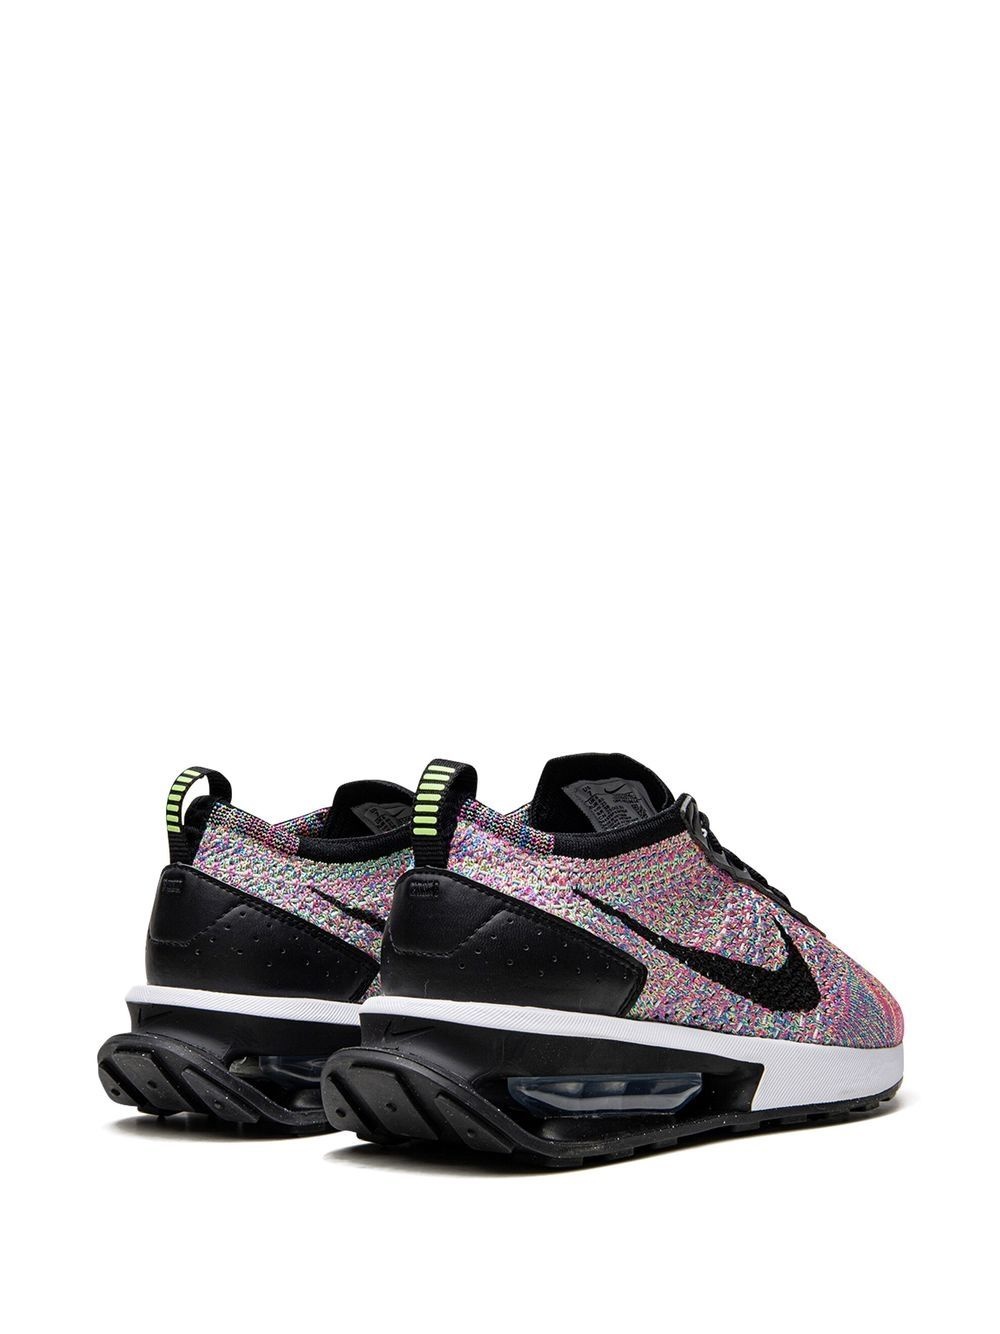 Air Max Flyknit Racer "Multicolor" sneakers - 3